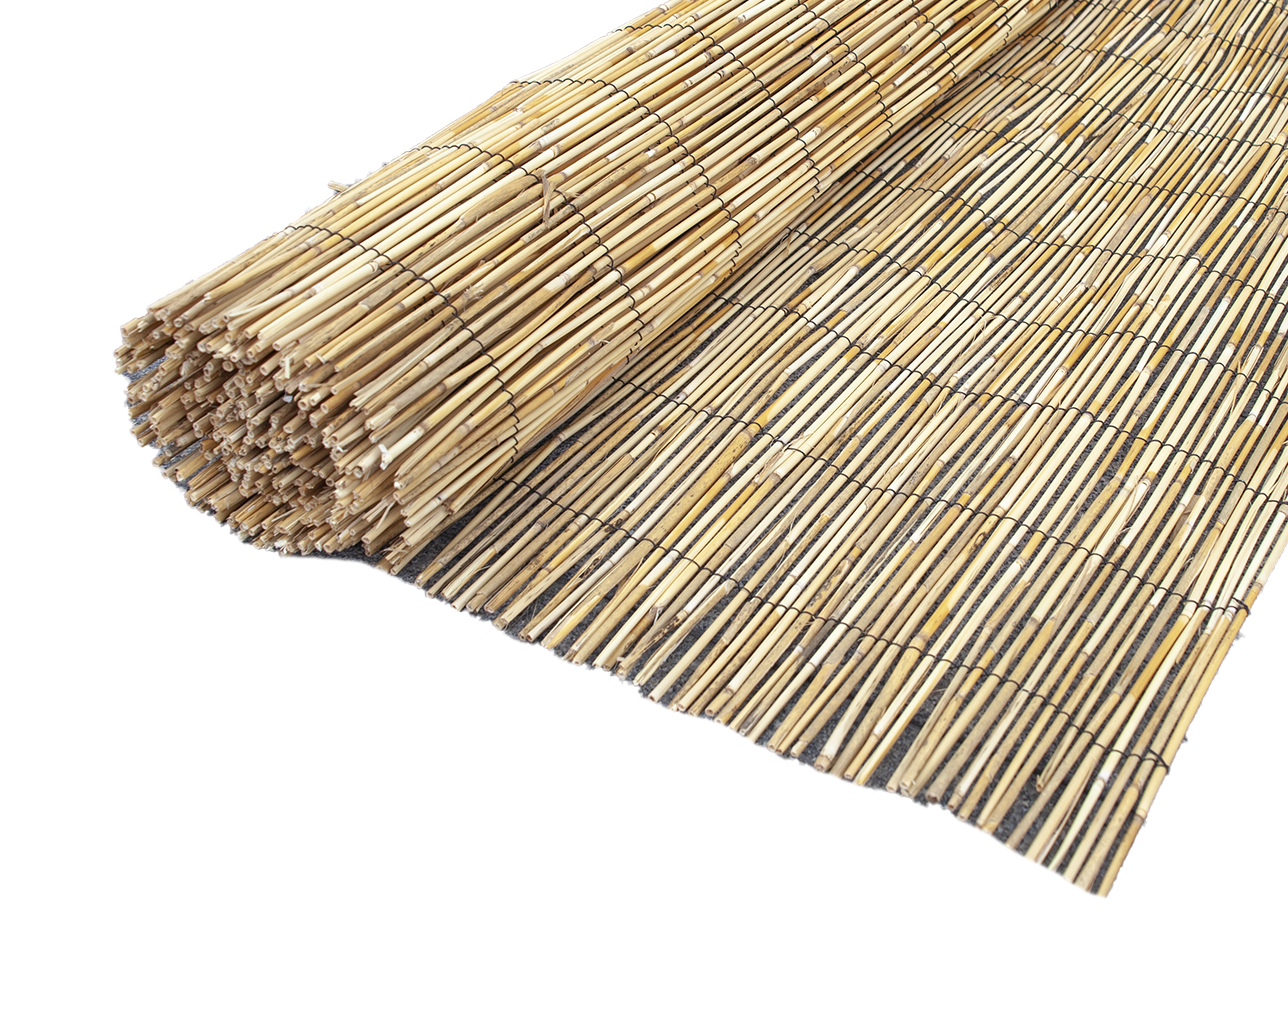 PRIGHT REED SCREEN 100X300CM